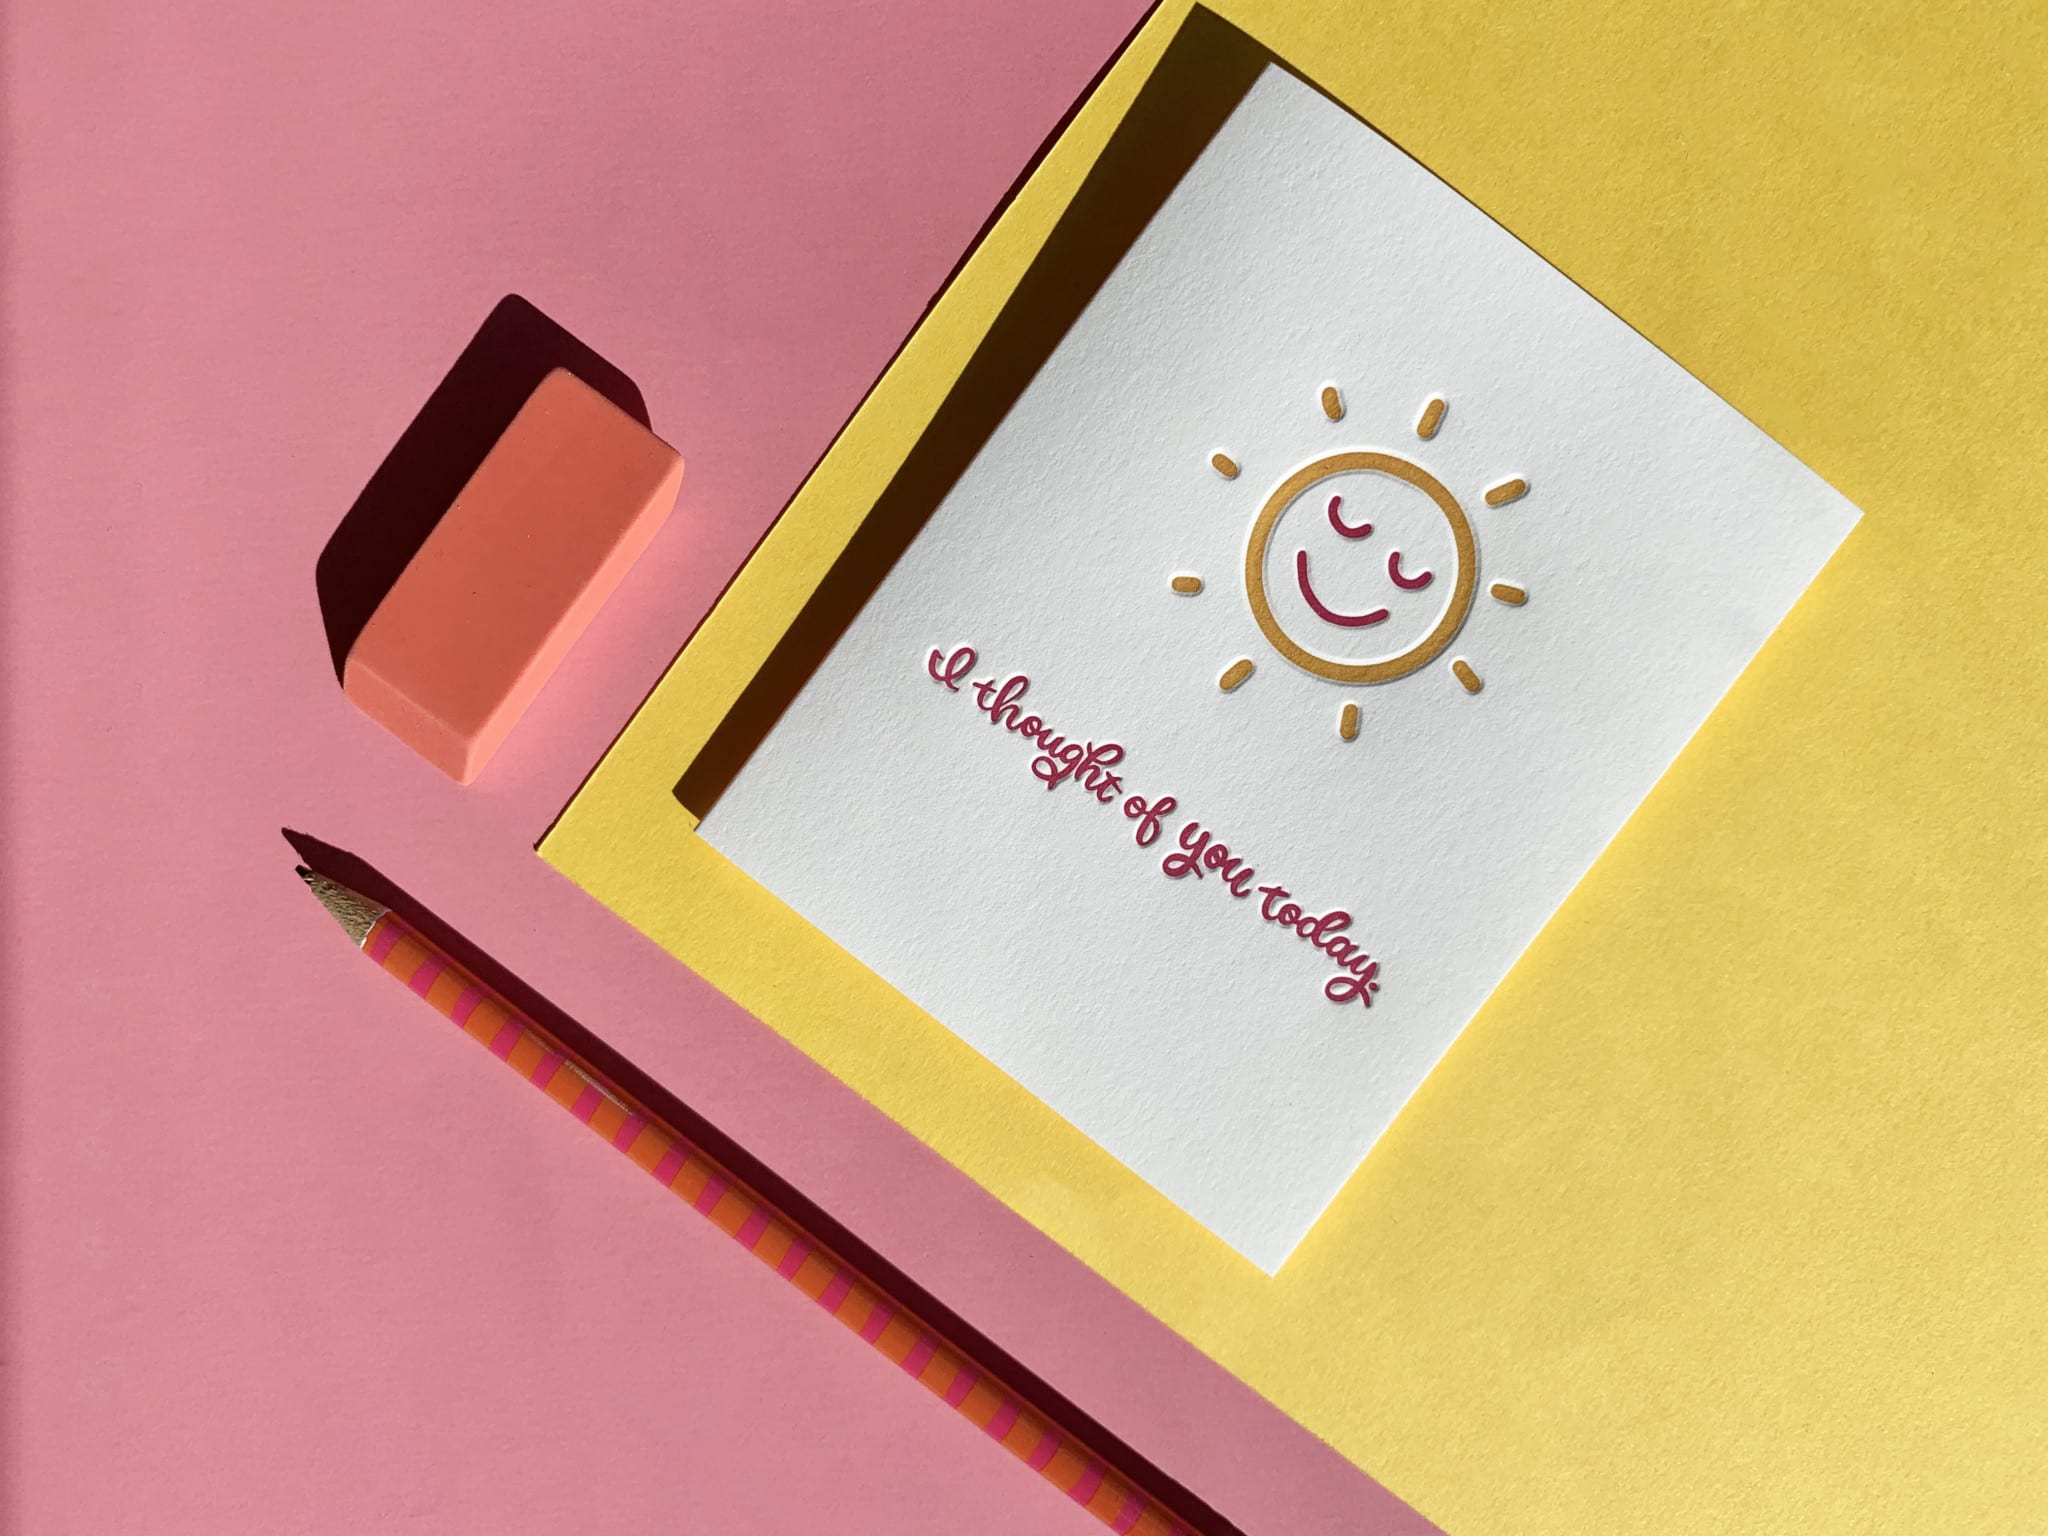 a hand-drawn, smiling, sunshine highlights this letterpress greeting card, as it is paired with a colored pencil and eraser over a bright layered-paper background